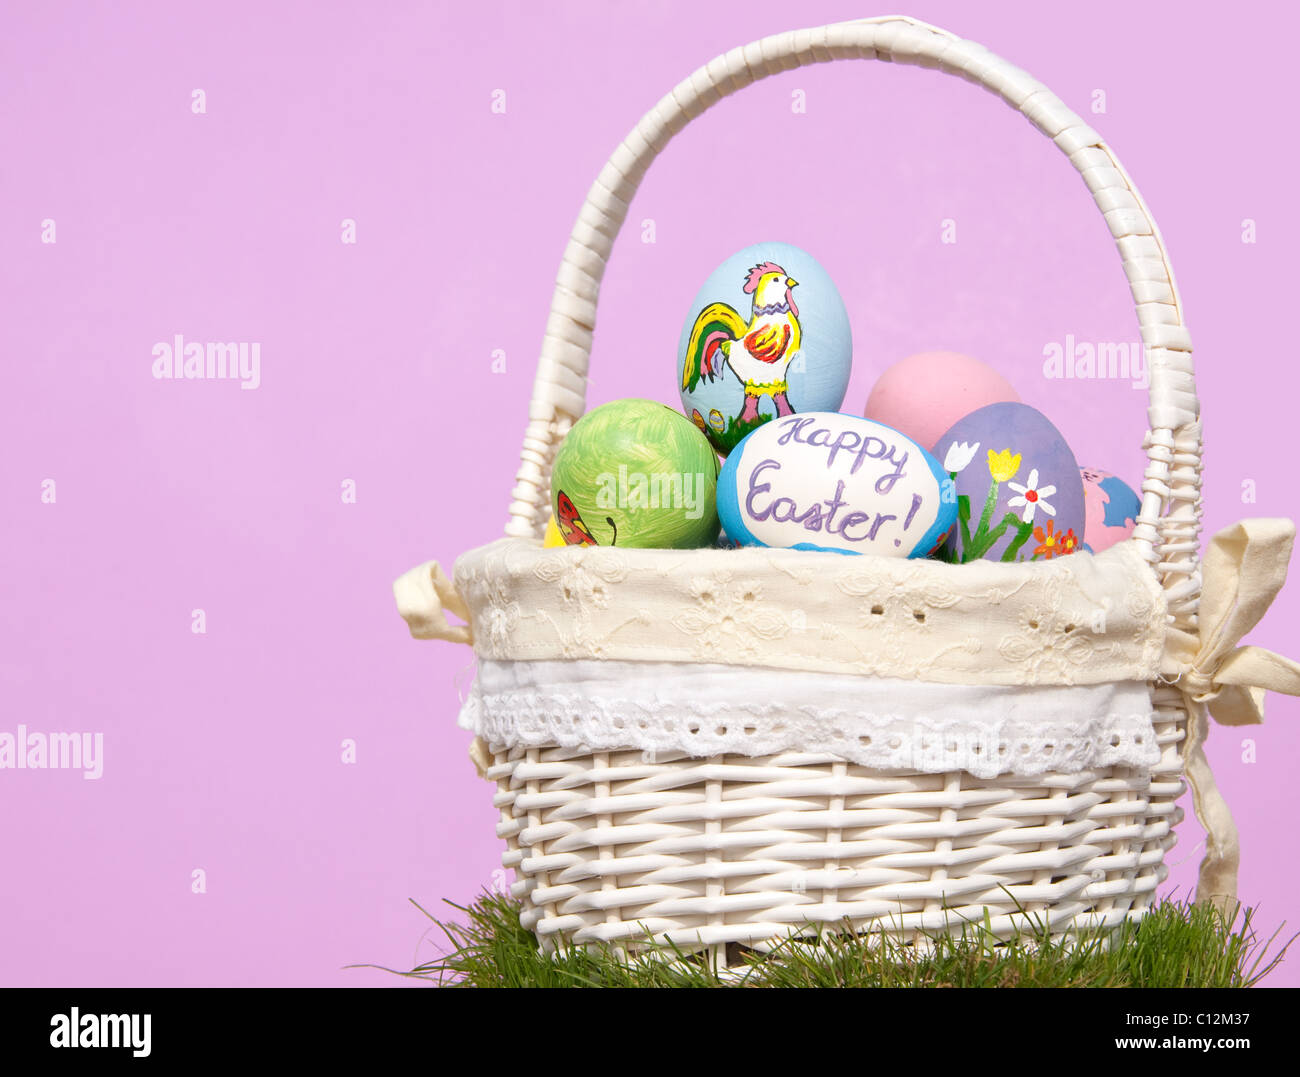 Basketful of colorful Easter eggs against purple background, with copy space Stock Photo